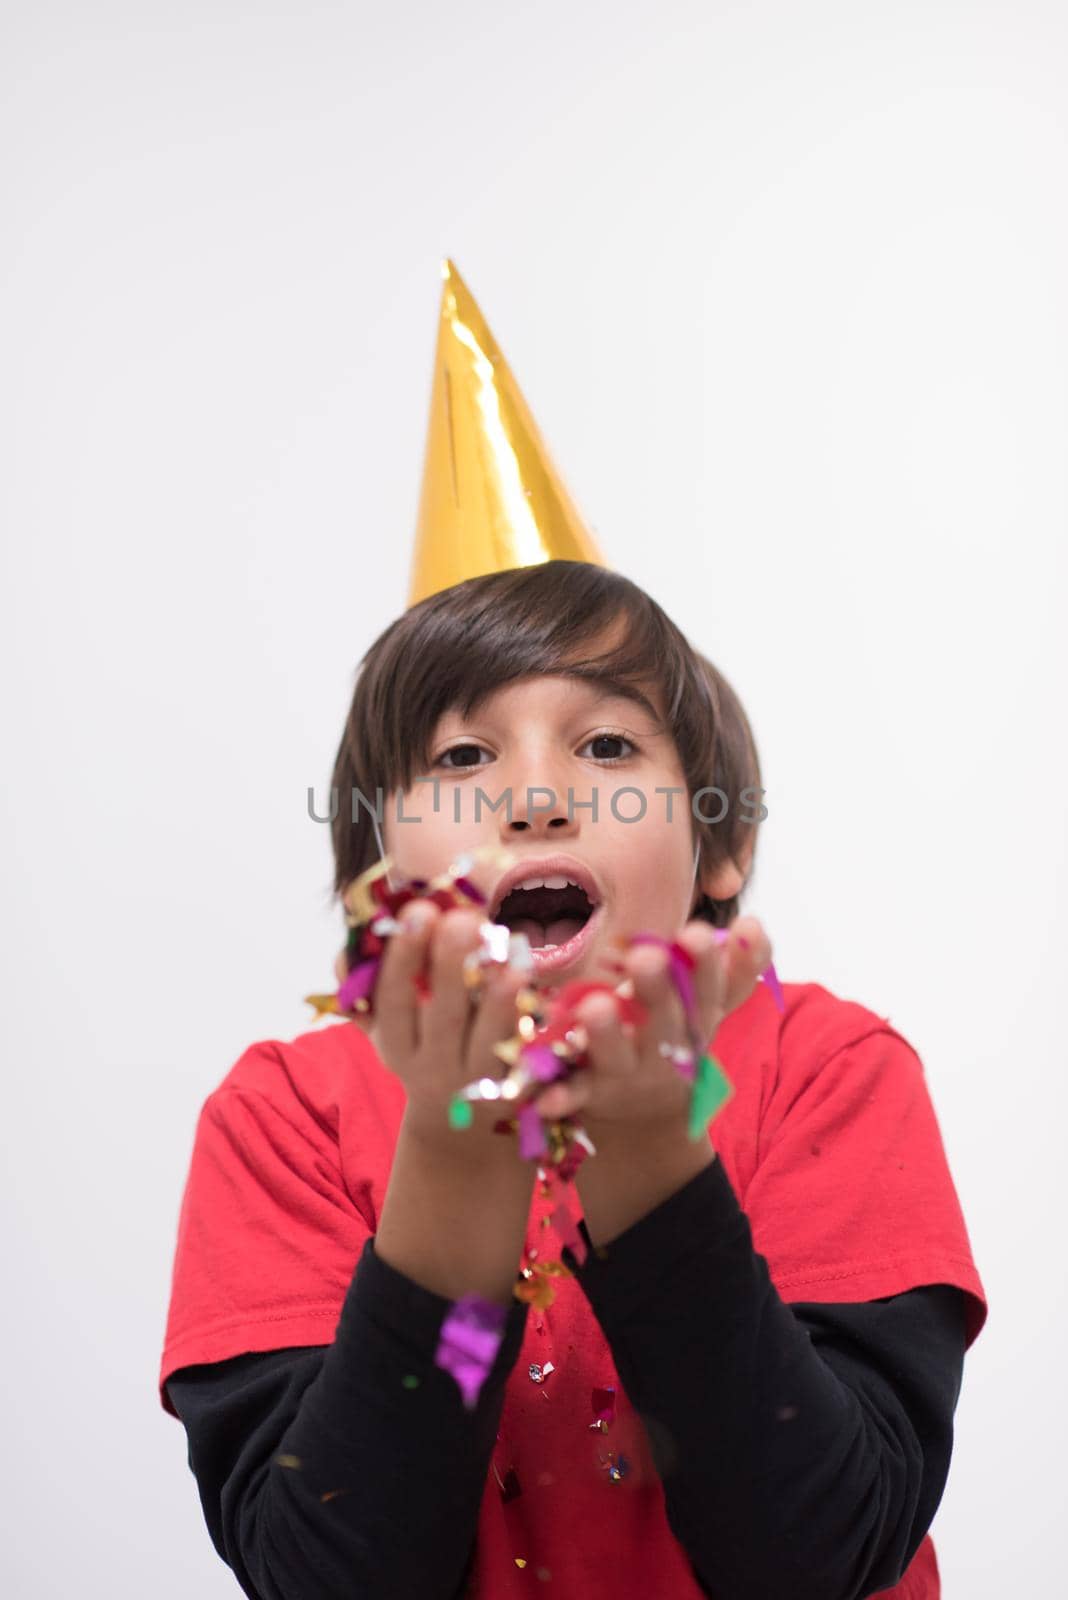 Happy kid celebrating party with blowing confetti